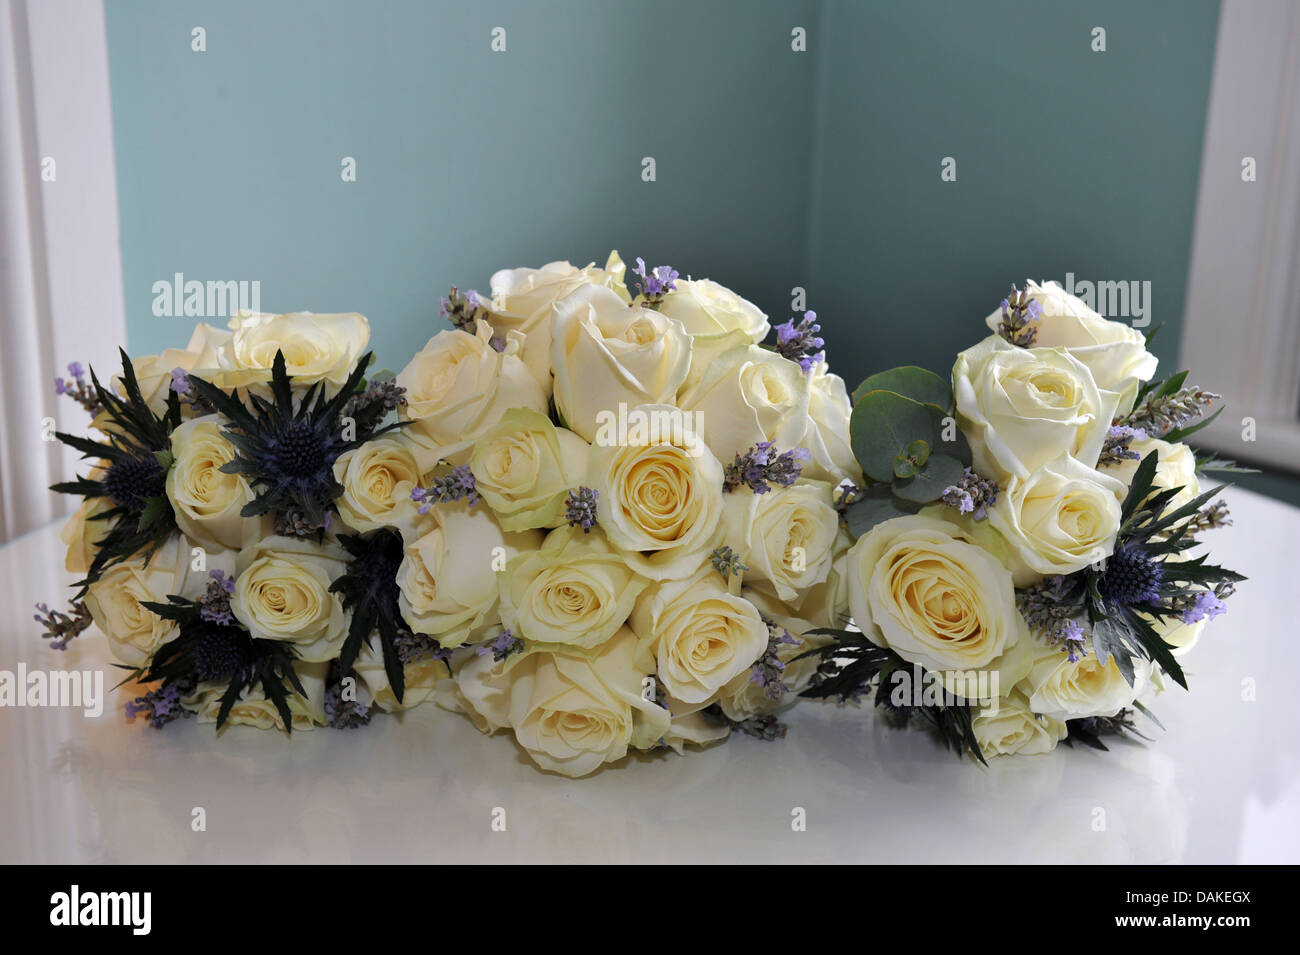 Wedding bouquet of white roses and purple heather Stock Photo